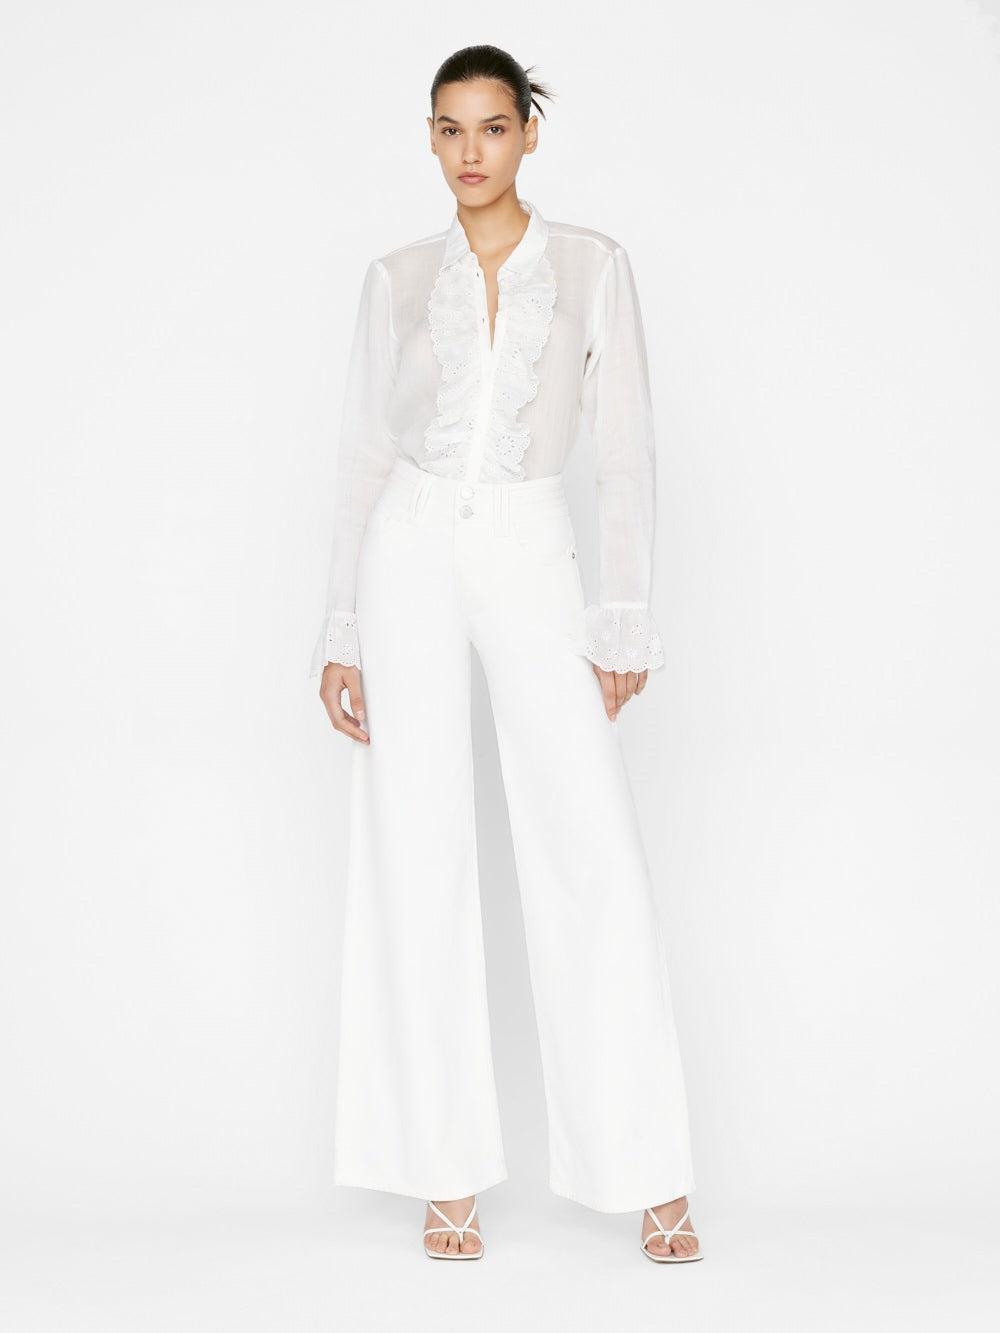 The model is wearing a Frame Triple Stitch Wide Leg - Blanc blouse and high-rise wide-leg pants.